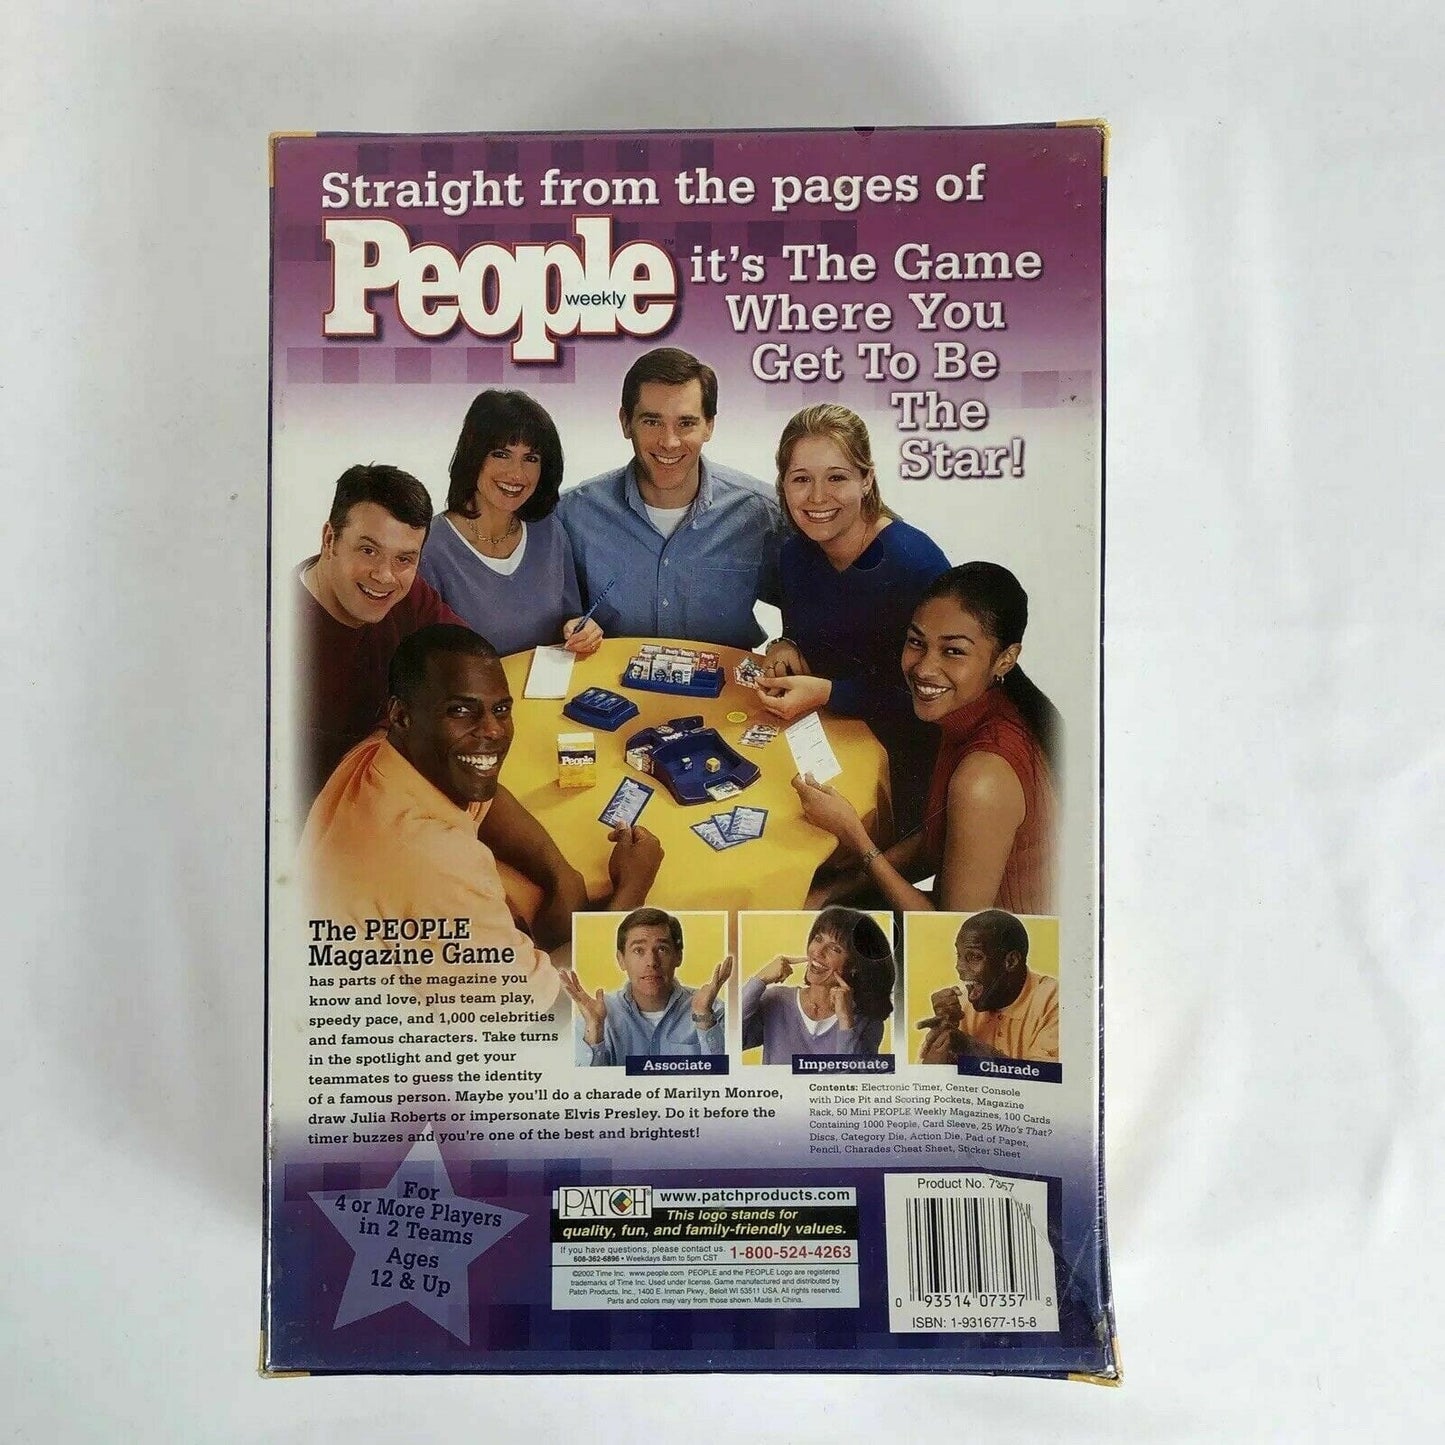 People Weekly Board Game by Patch, The Game Where You Get To Be The Star NIB